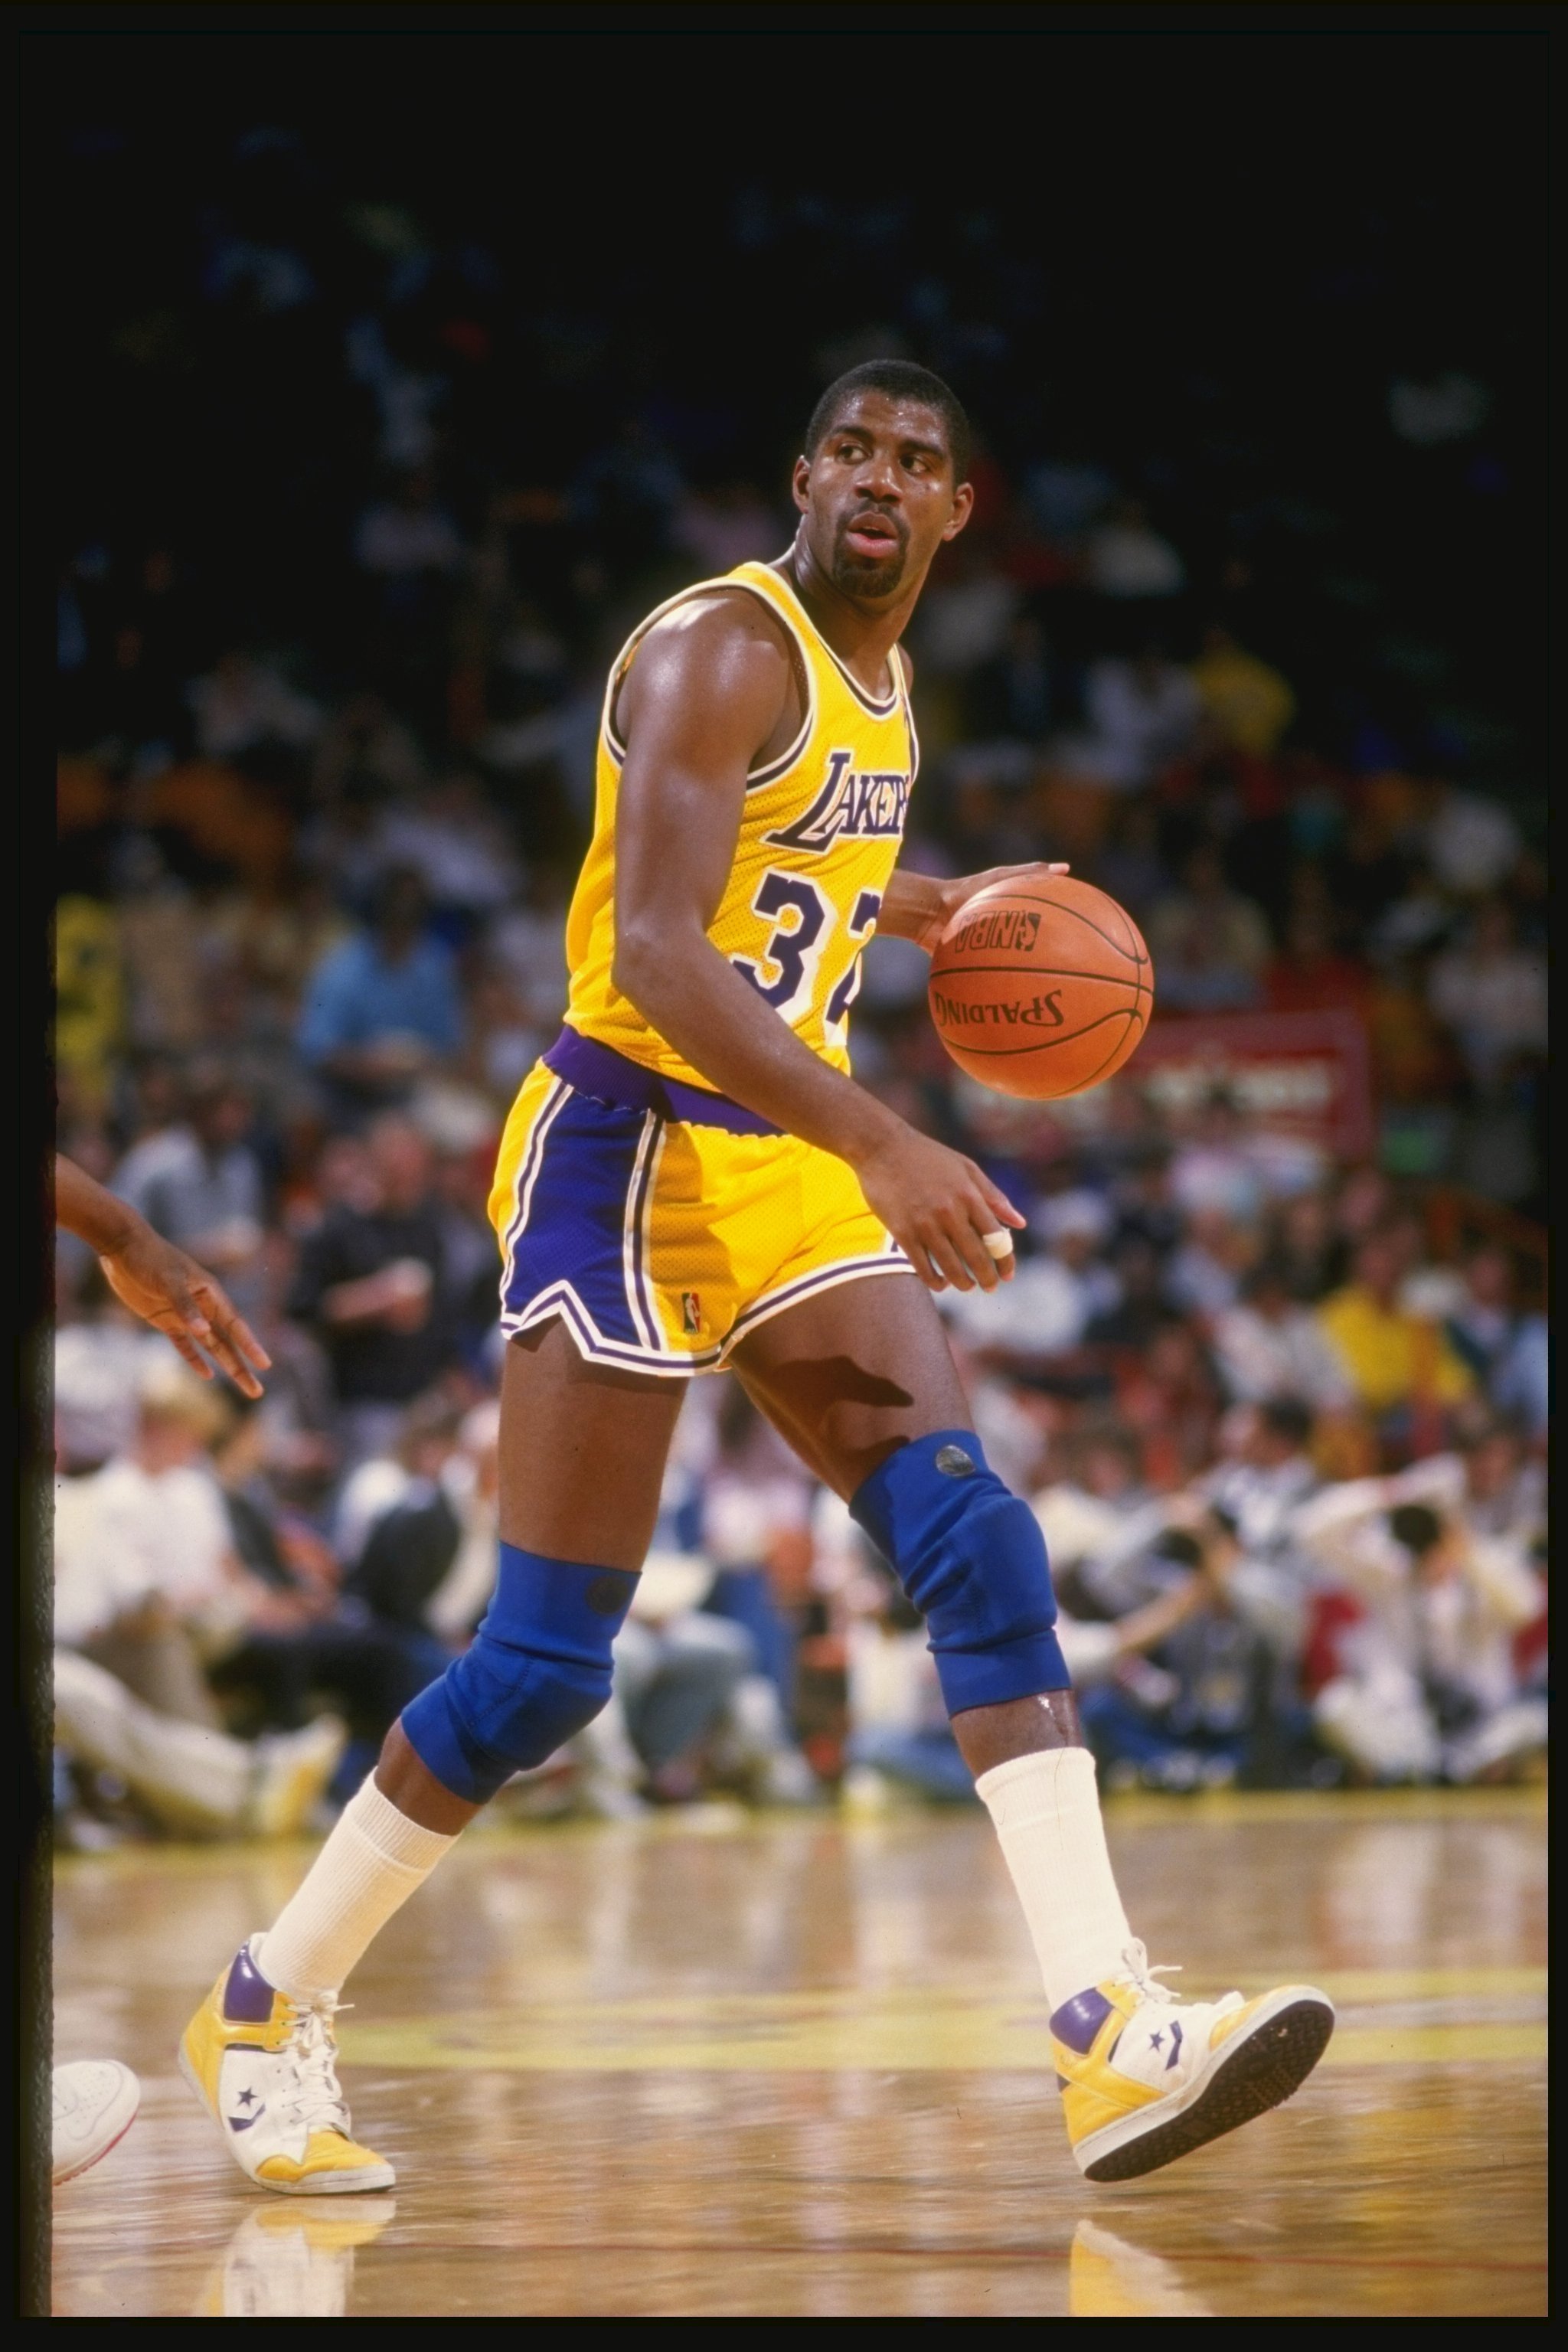 Former Los Angeles Lakers baller Magic Johnson dribbles the ball during a game at the Great Western Forum in Inglewood, California circa 1987. | Source: Getty Images